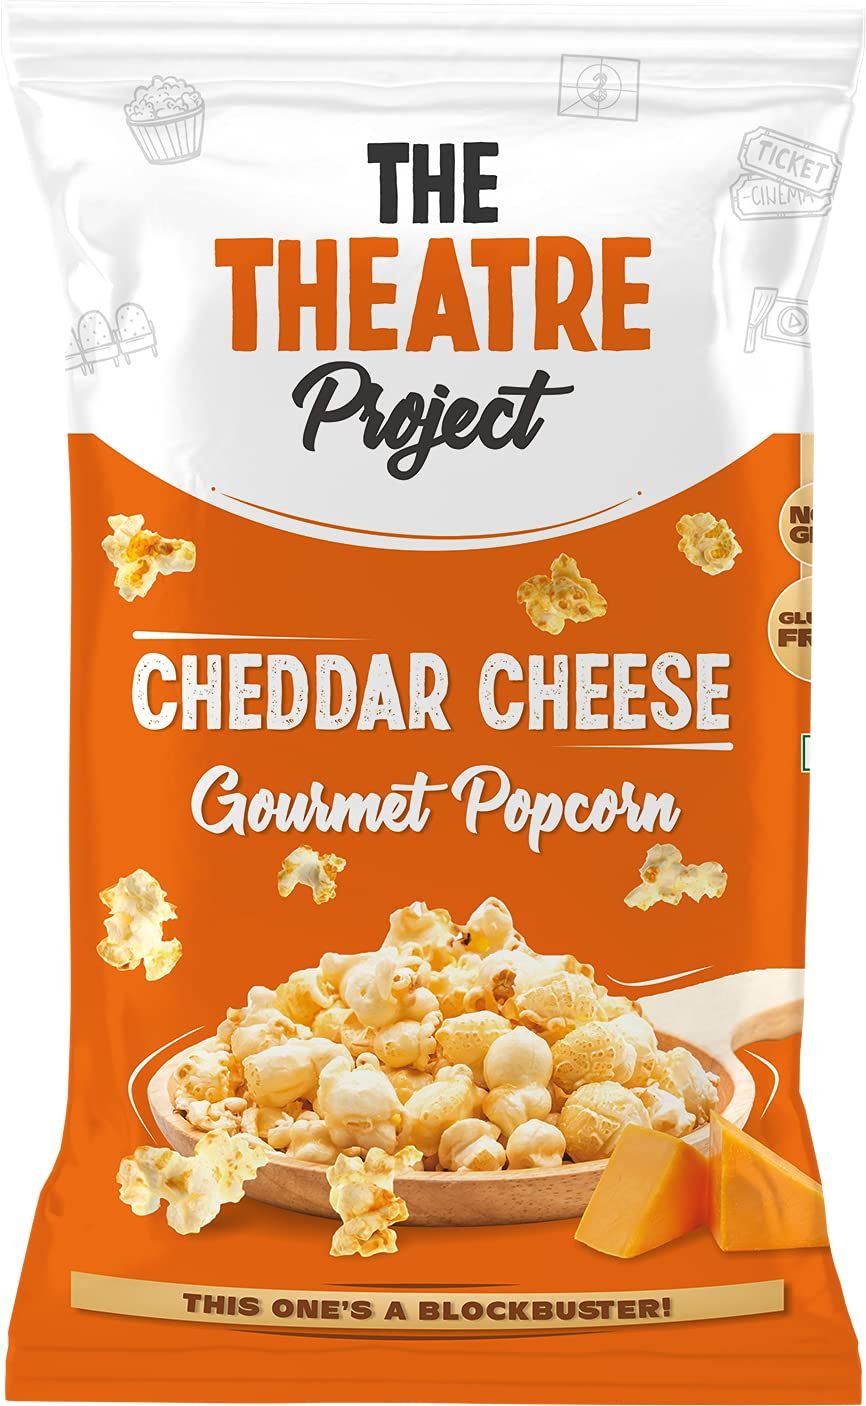 The Theatre Project Popcorn Cheddar Cheese Flavor Image